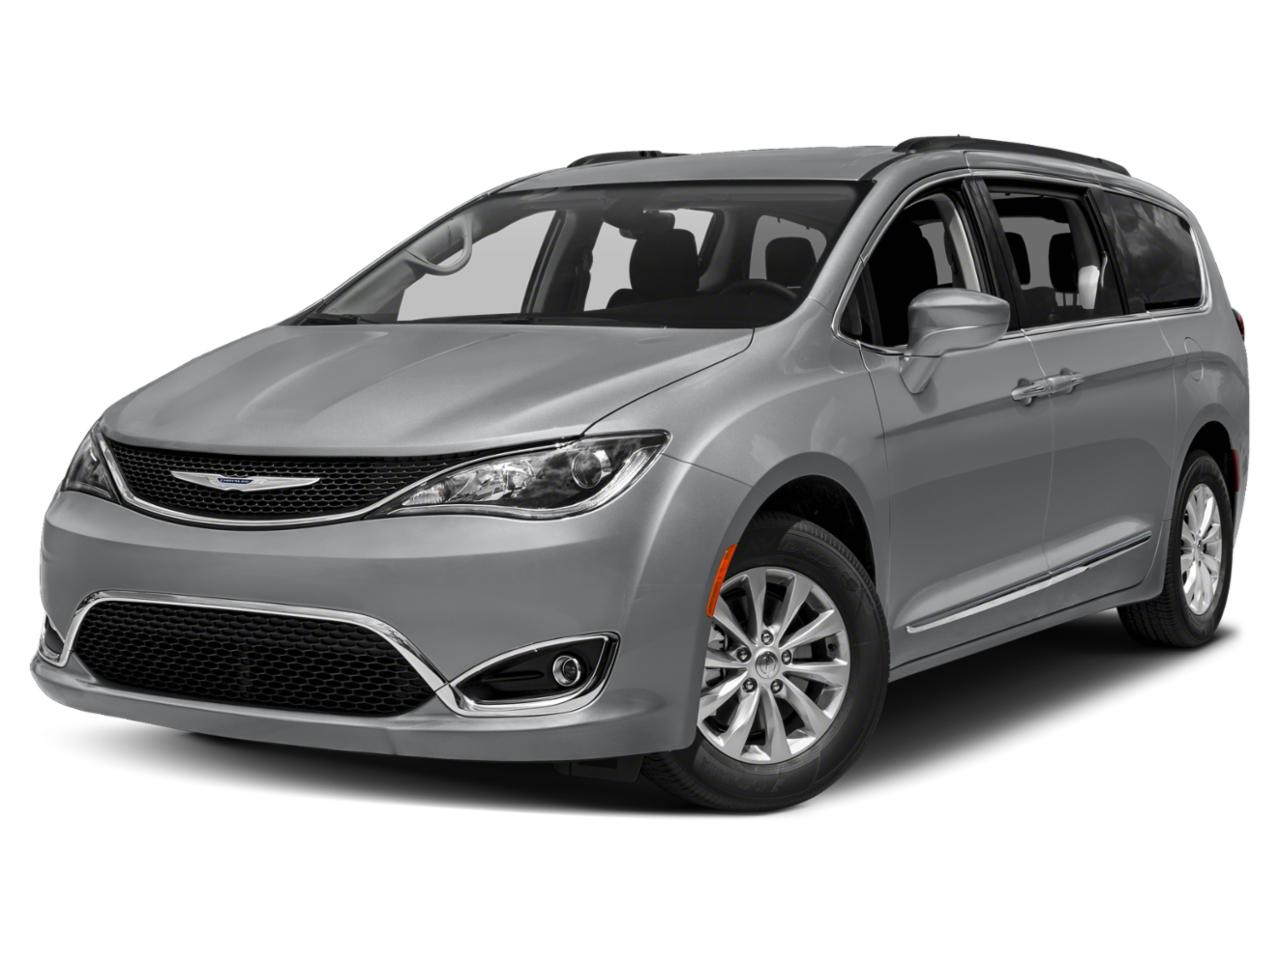 2019 Chrysler Pacifica Vehicle Photo in BOONVILLE, IN 47601-9633